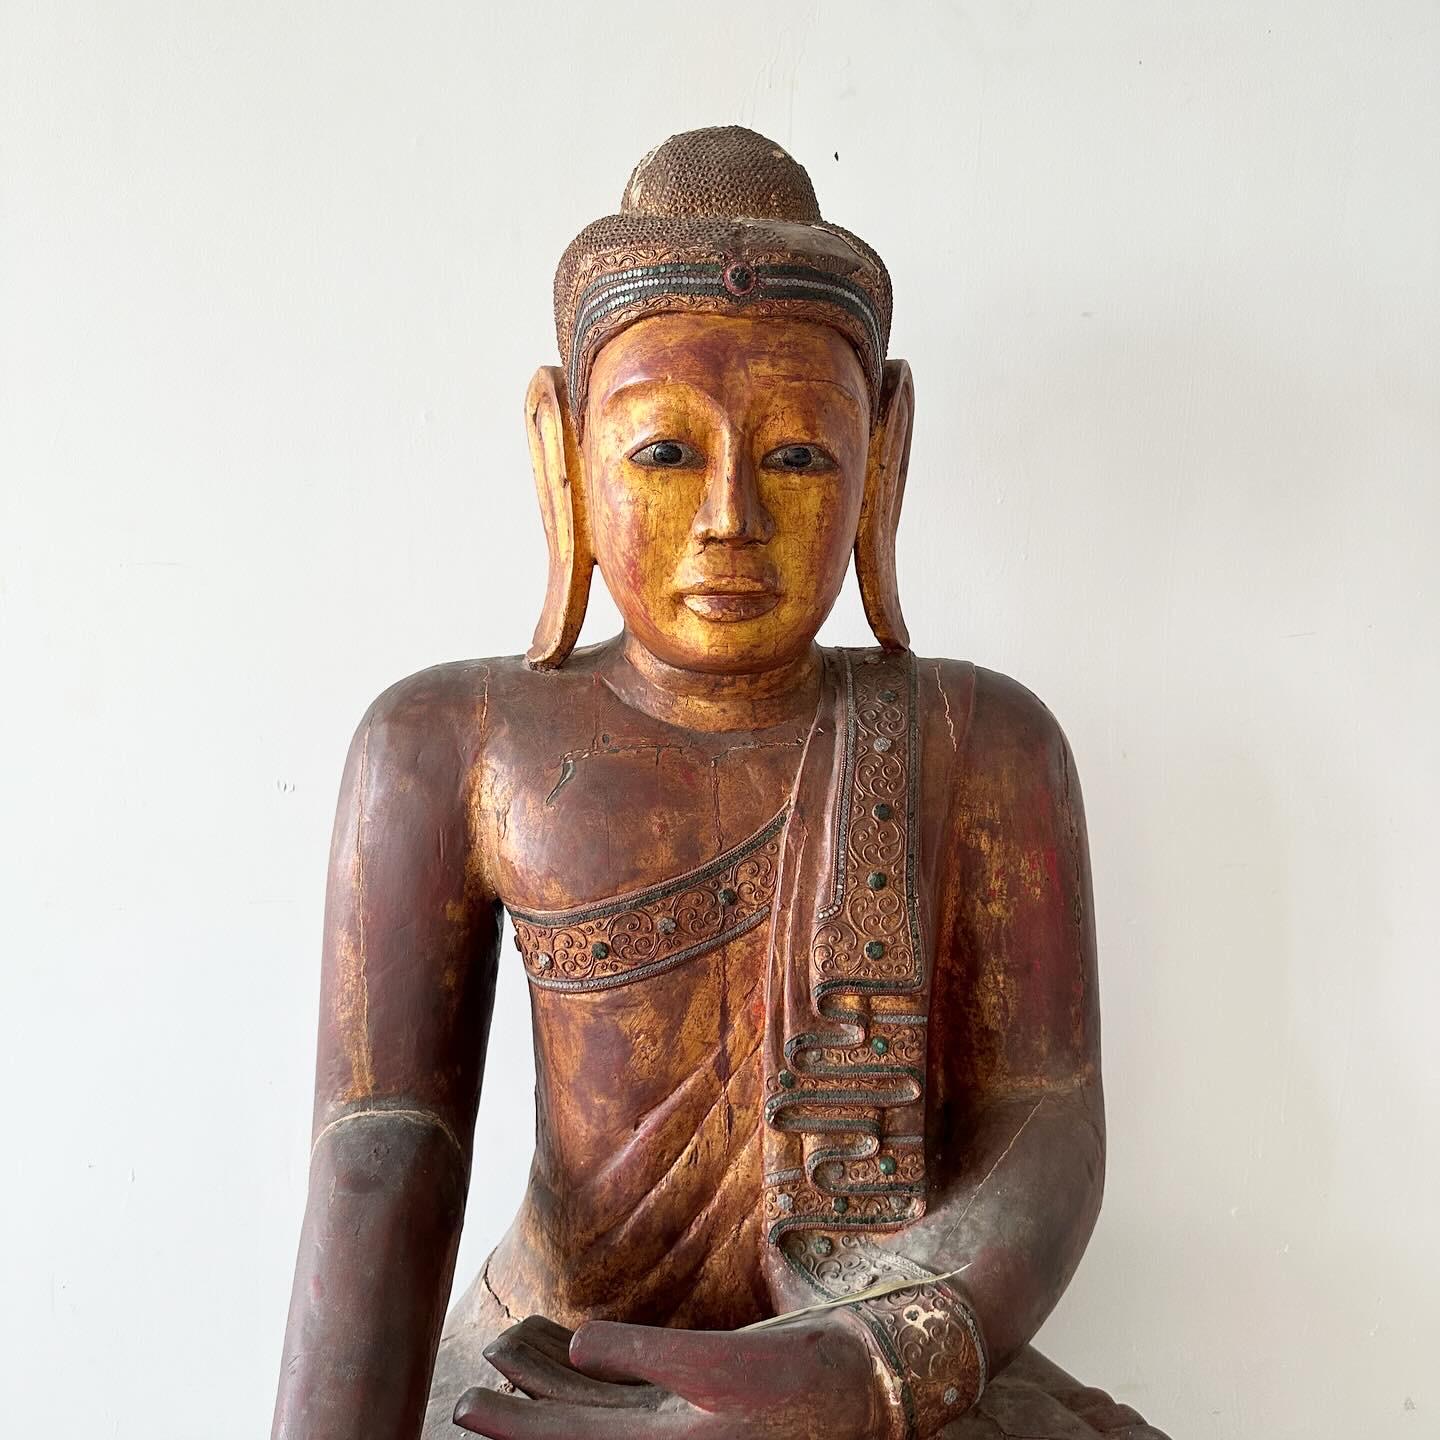 Larger than life, exquisite wooden Southeast Asian Buddha statue in Bhumisparsha mudra pose. The figure is solid wood painted red with gilded highlights. 

Bhumisparsha translates into 'touching the earth'.
It is more commonly known as the 'earth